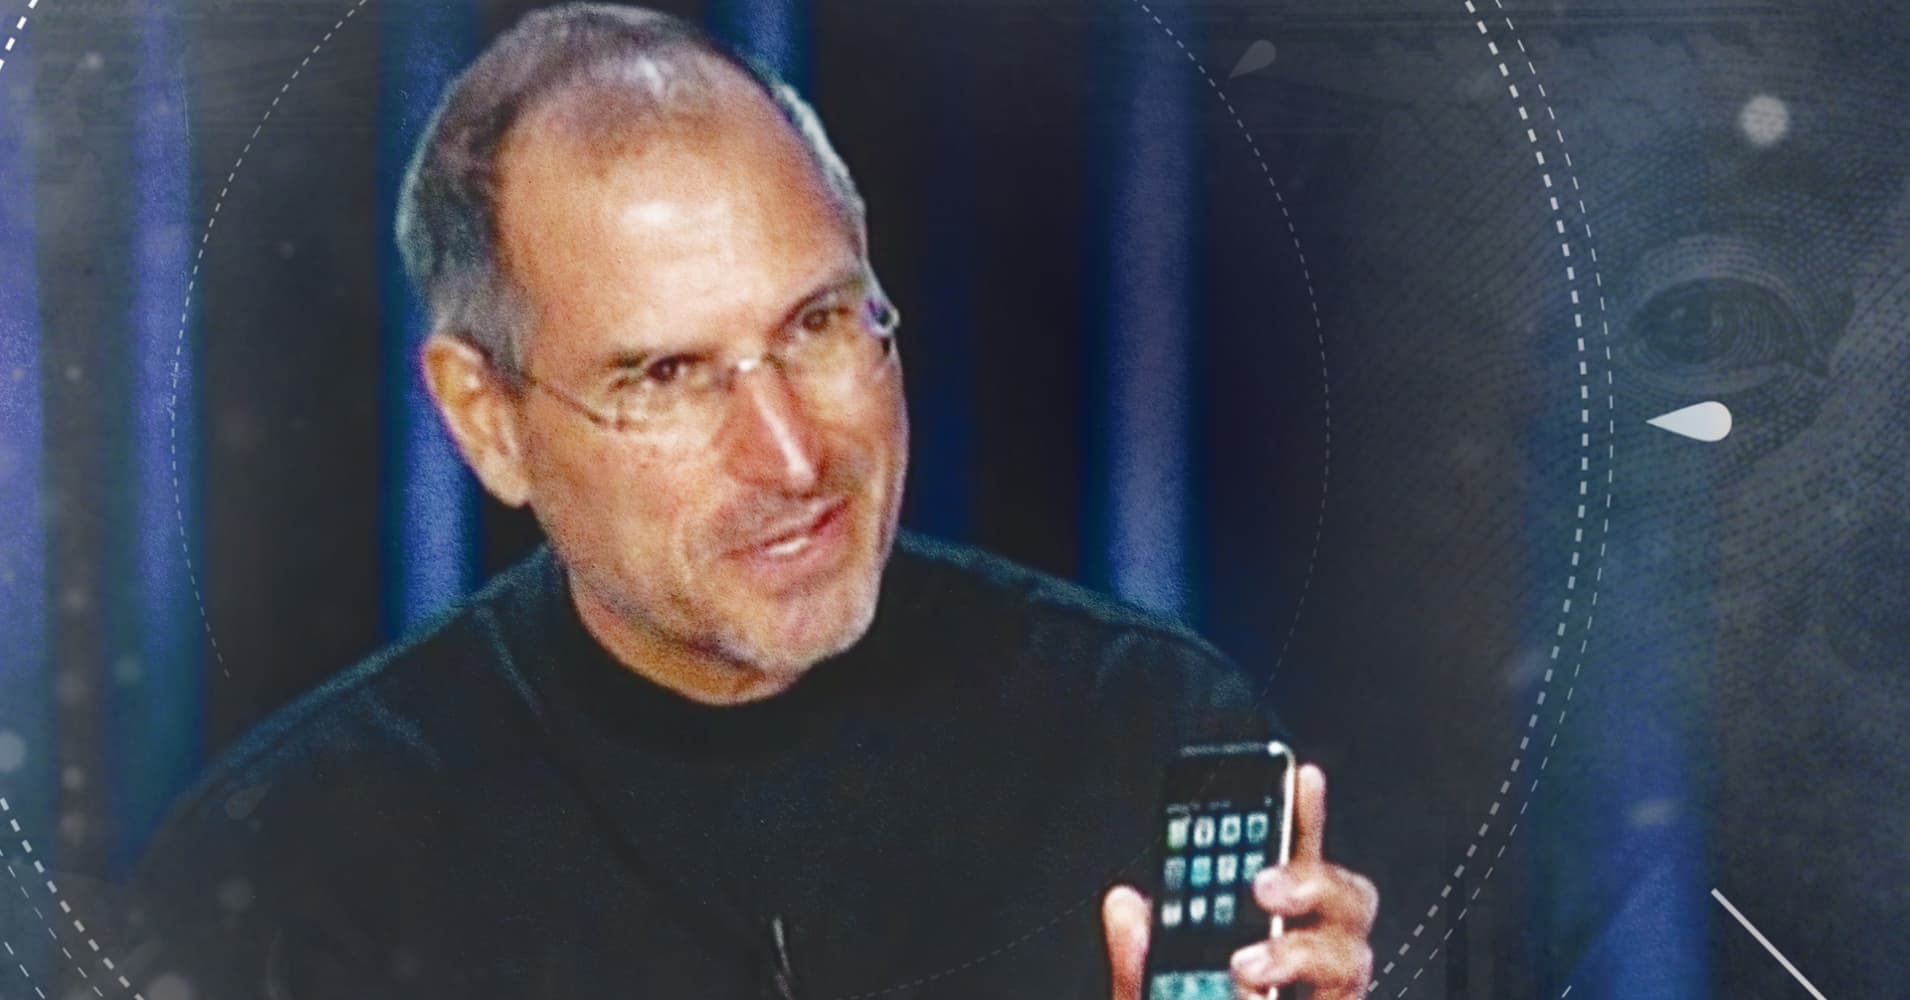 Watch Steve Jobs explain the iPhone in 2007 CNBC interview